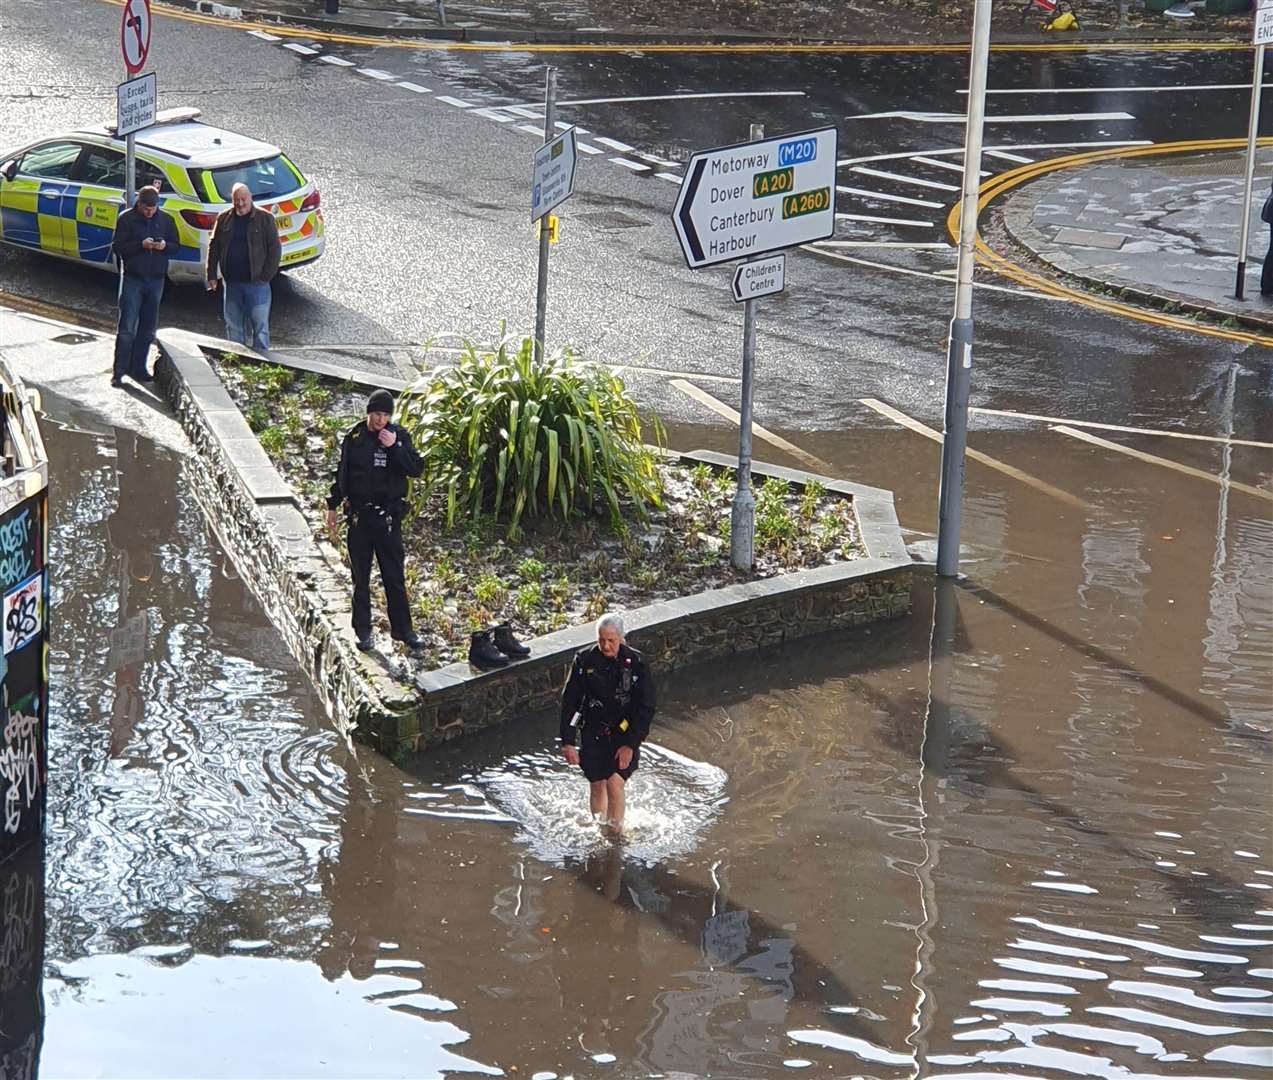 Police had to enter the water. Picture: Yasmin Moore